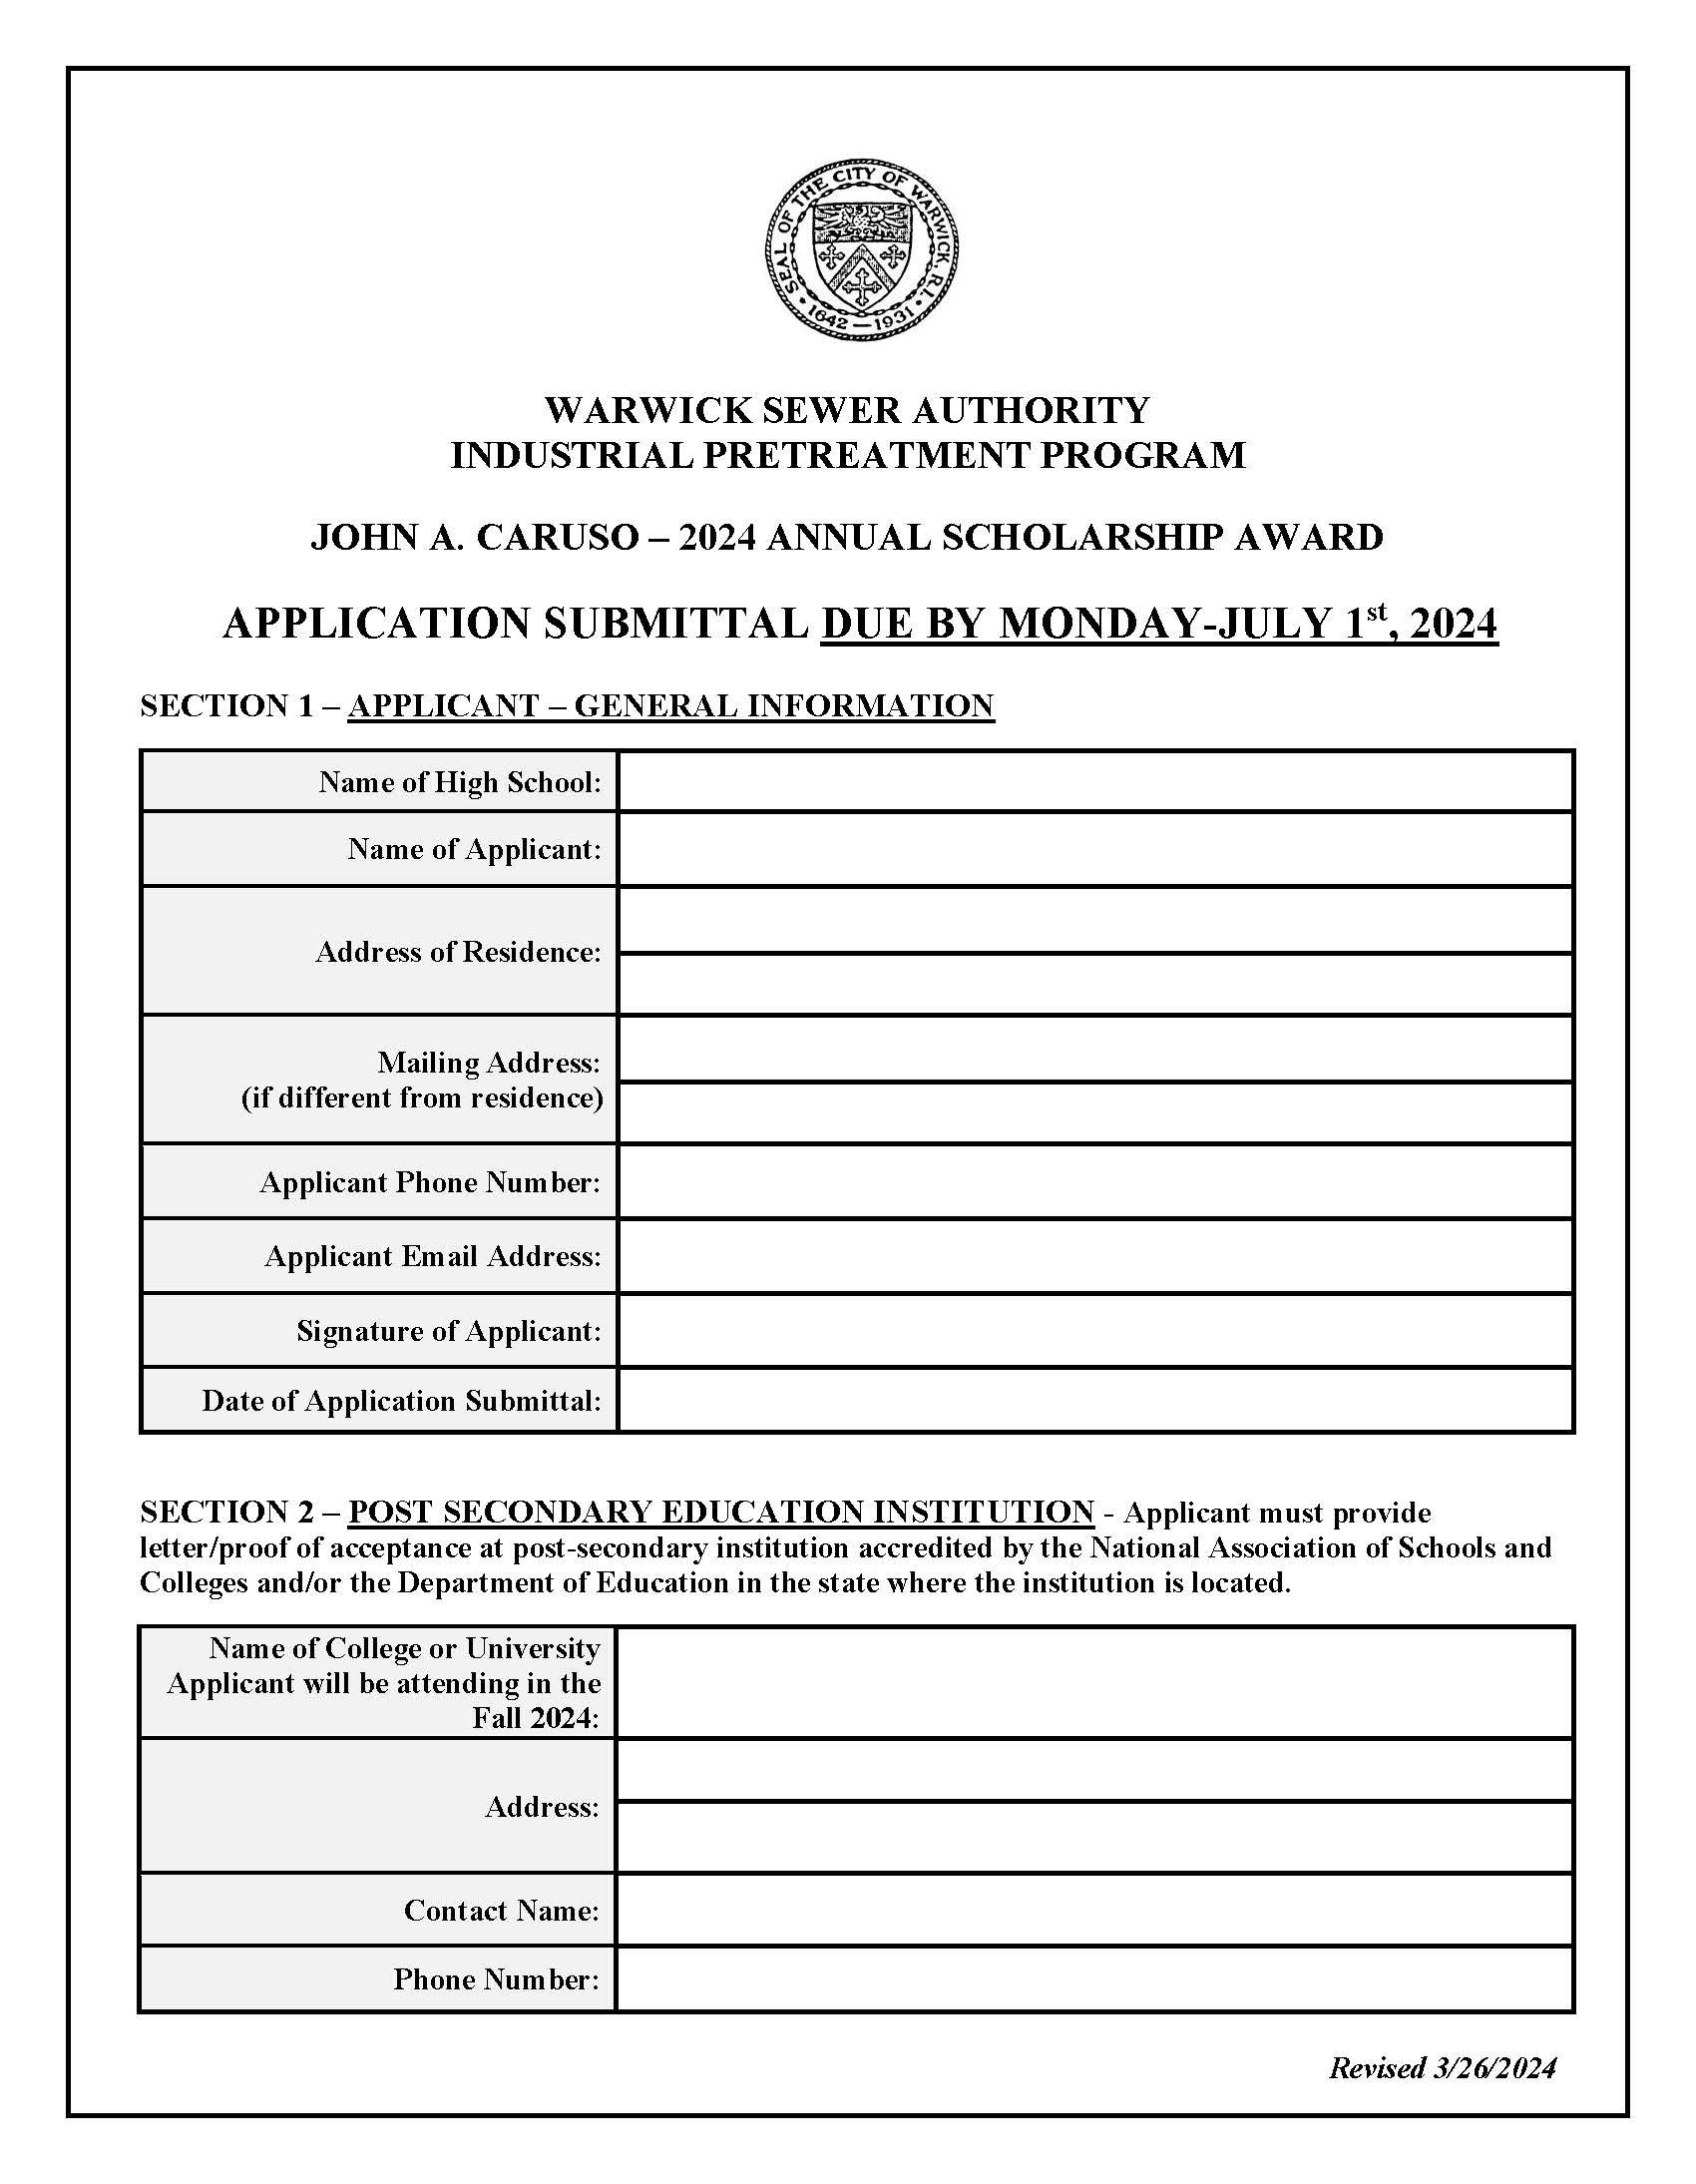 John A. Caruso Scholarship Award offered by the Warwick Sewer Authority Application Pg 1